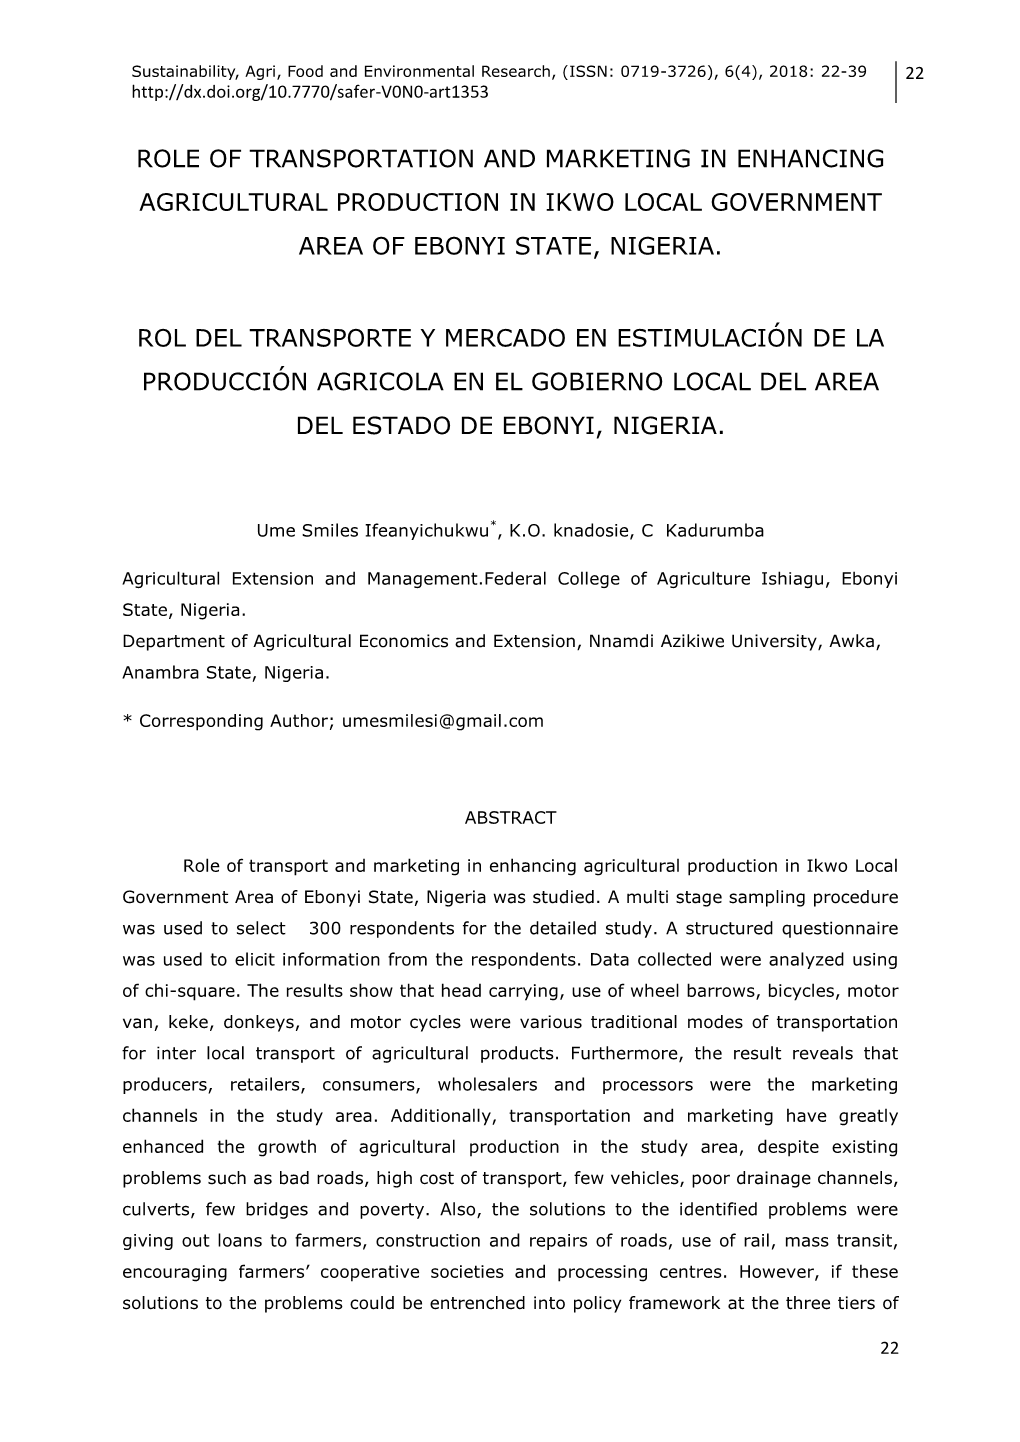 Role of Transportation and Marketing in Enhancing Agricultural Production in Ikwo Local Government Area of Ebonyi State, Nigeria